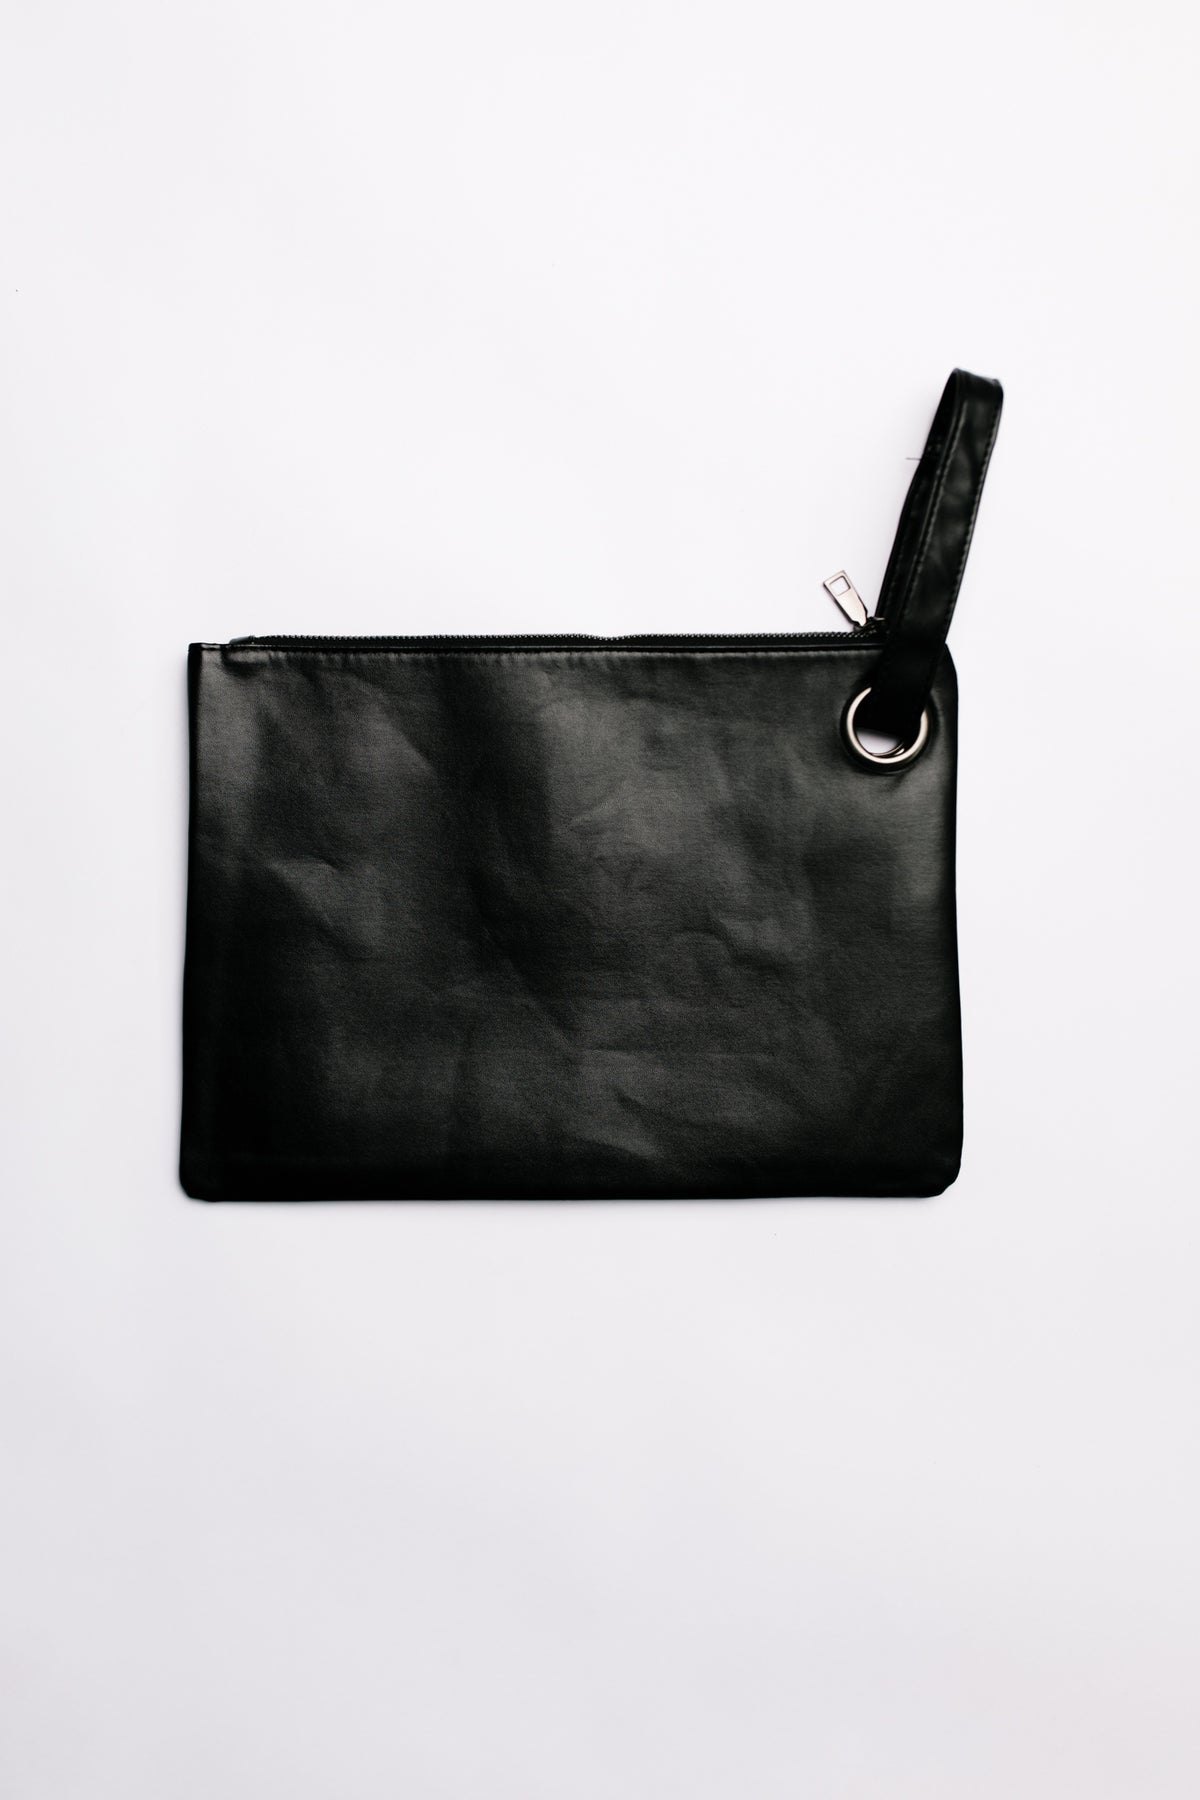 LAST ONE |2 colors| Grand Holiday Oversized Clutch